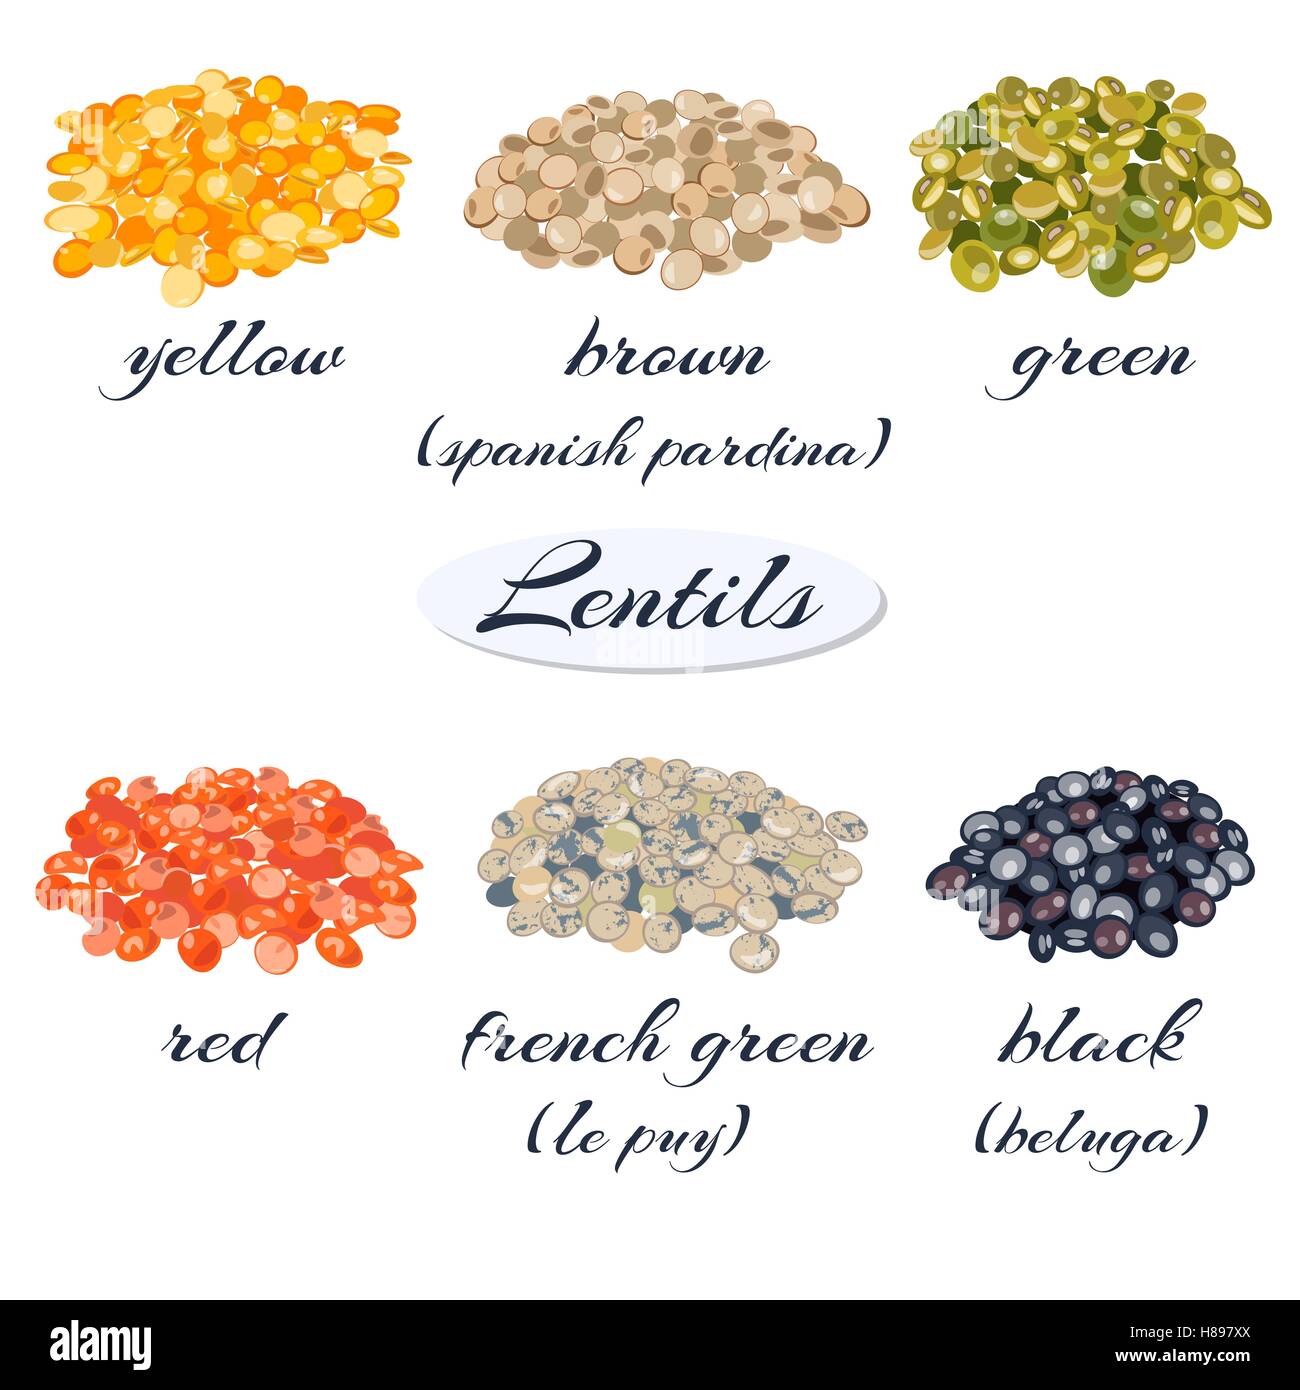 Various types of lentils. Yellow, brown, green, red, french green, black lentils. Vector illustration. Stock Vector